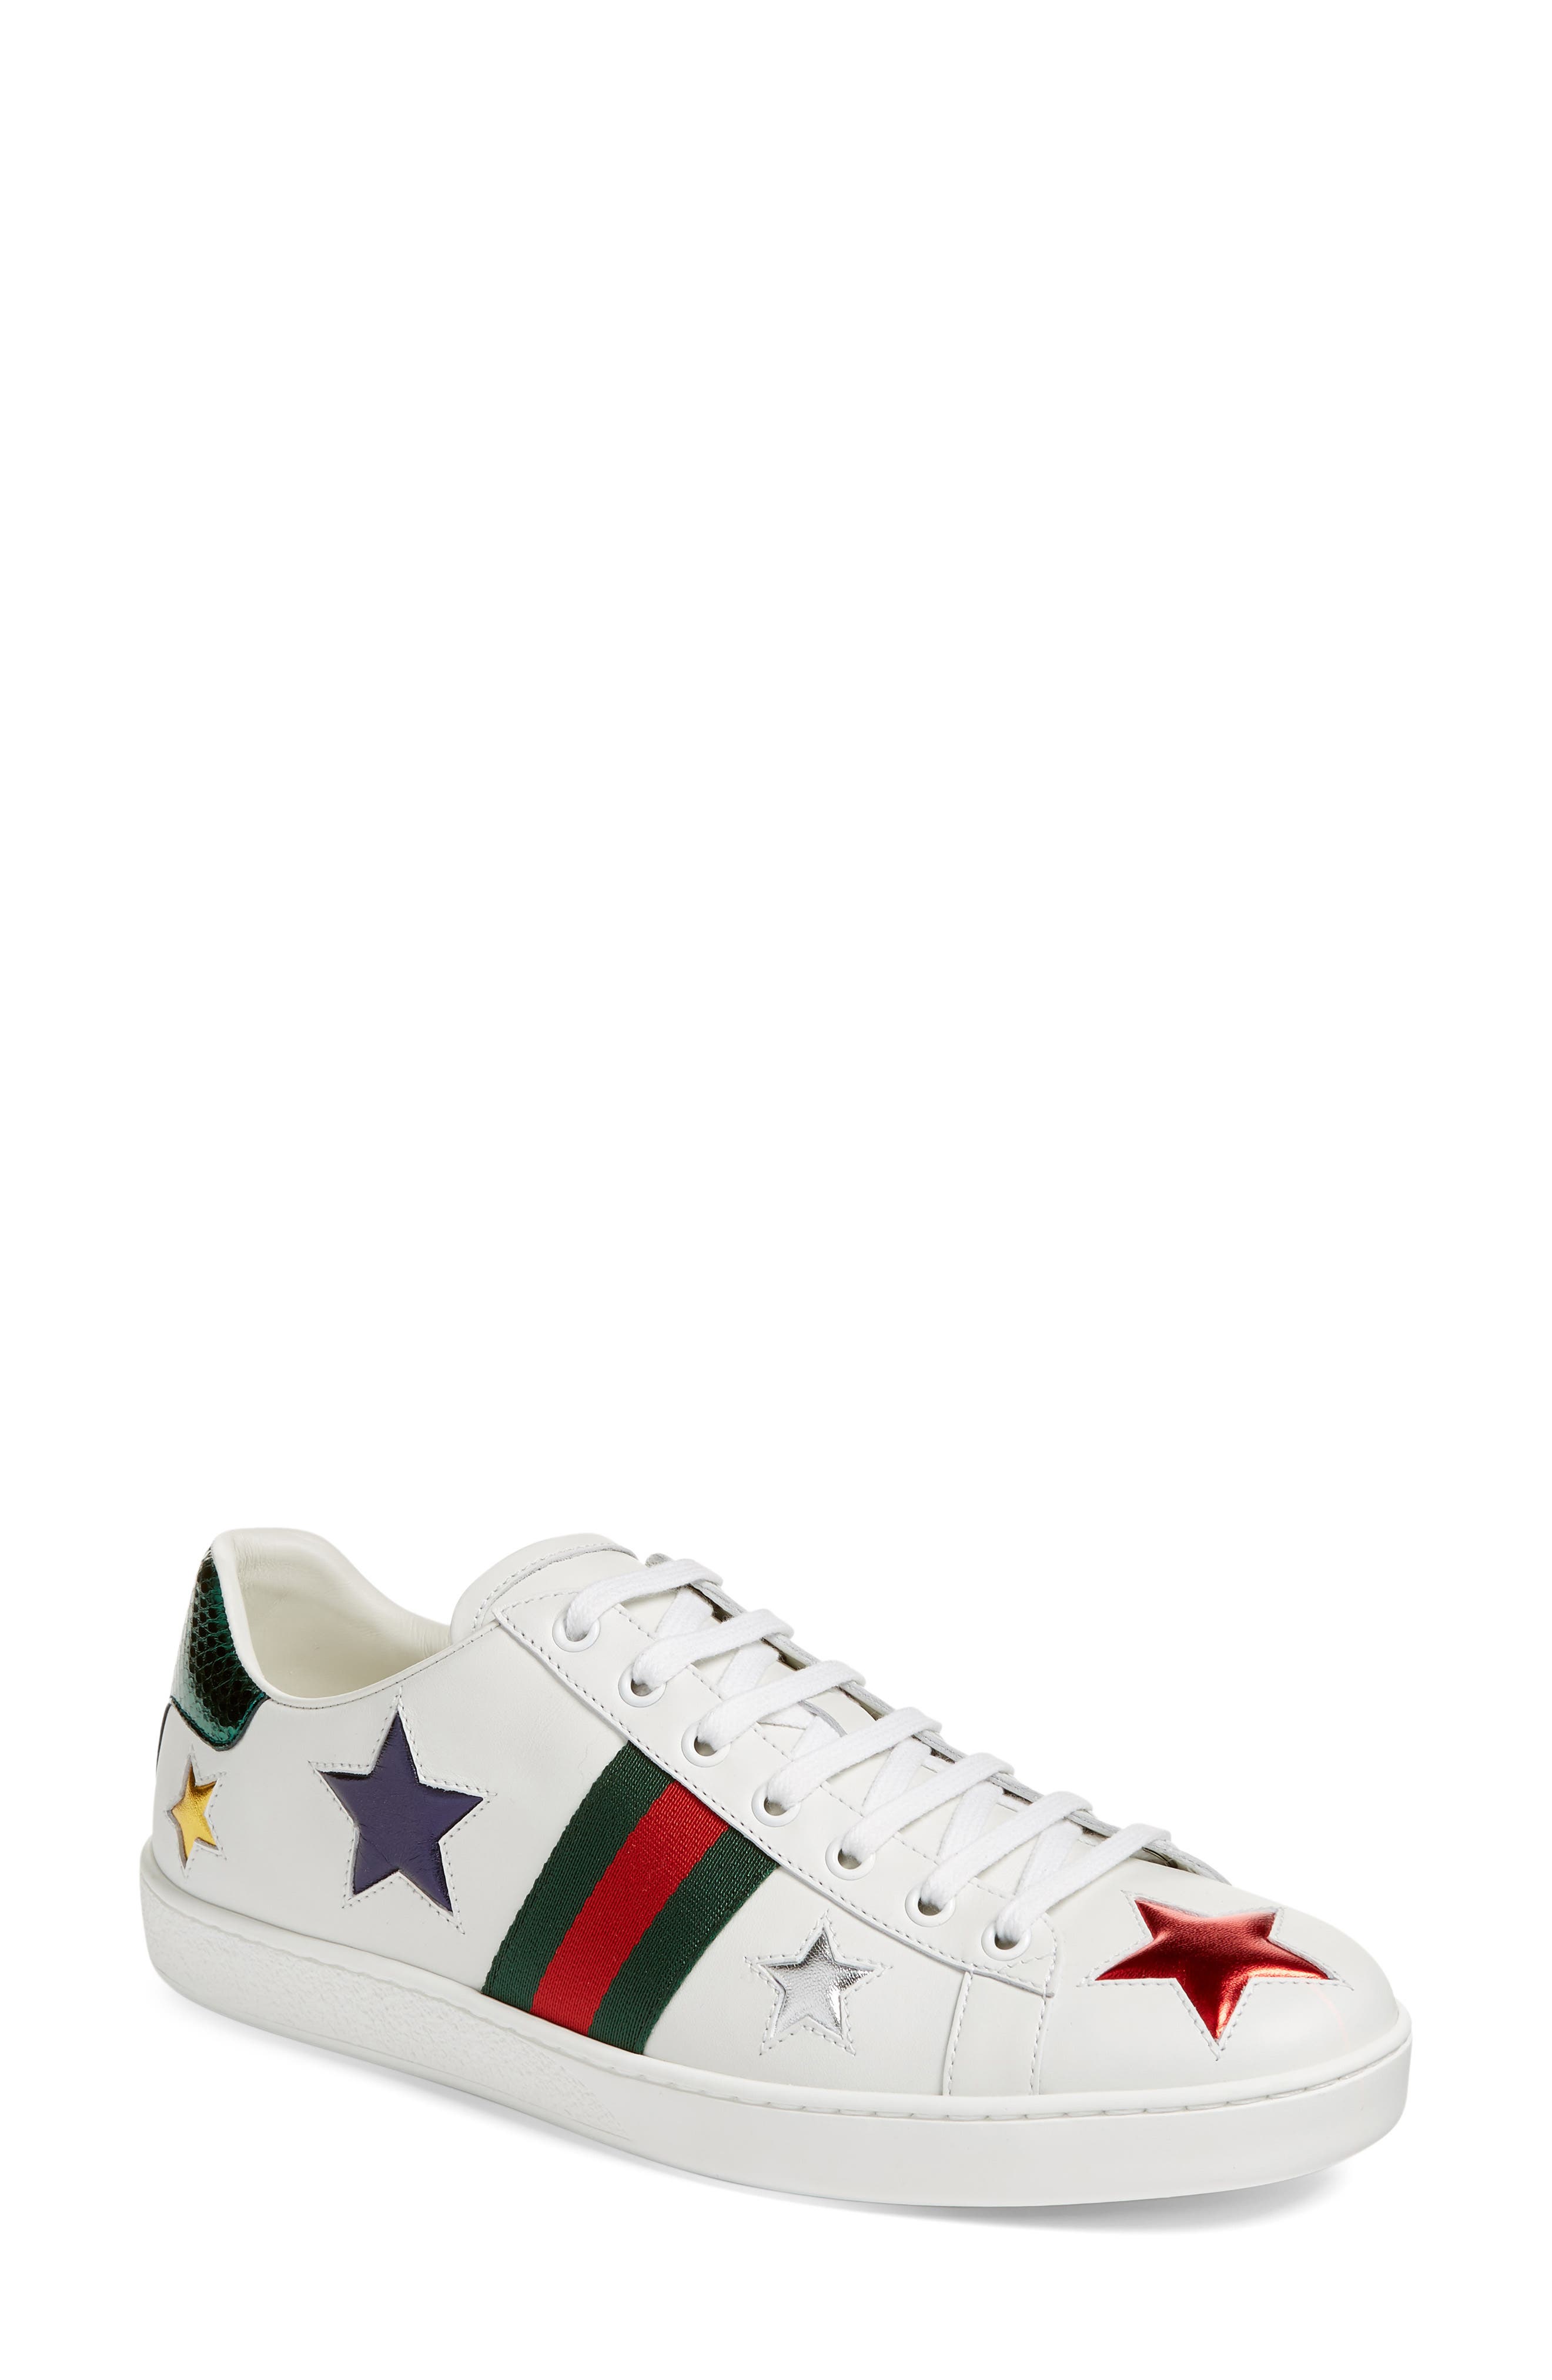 gucci tennis shoes with stars